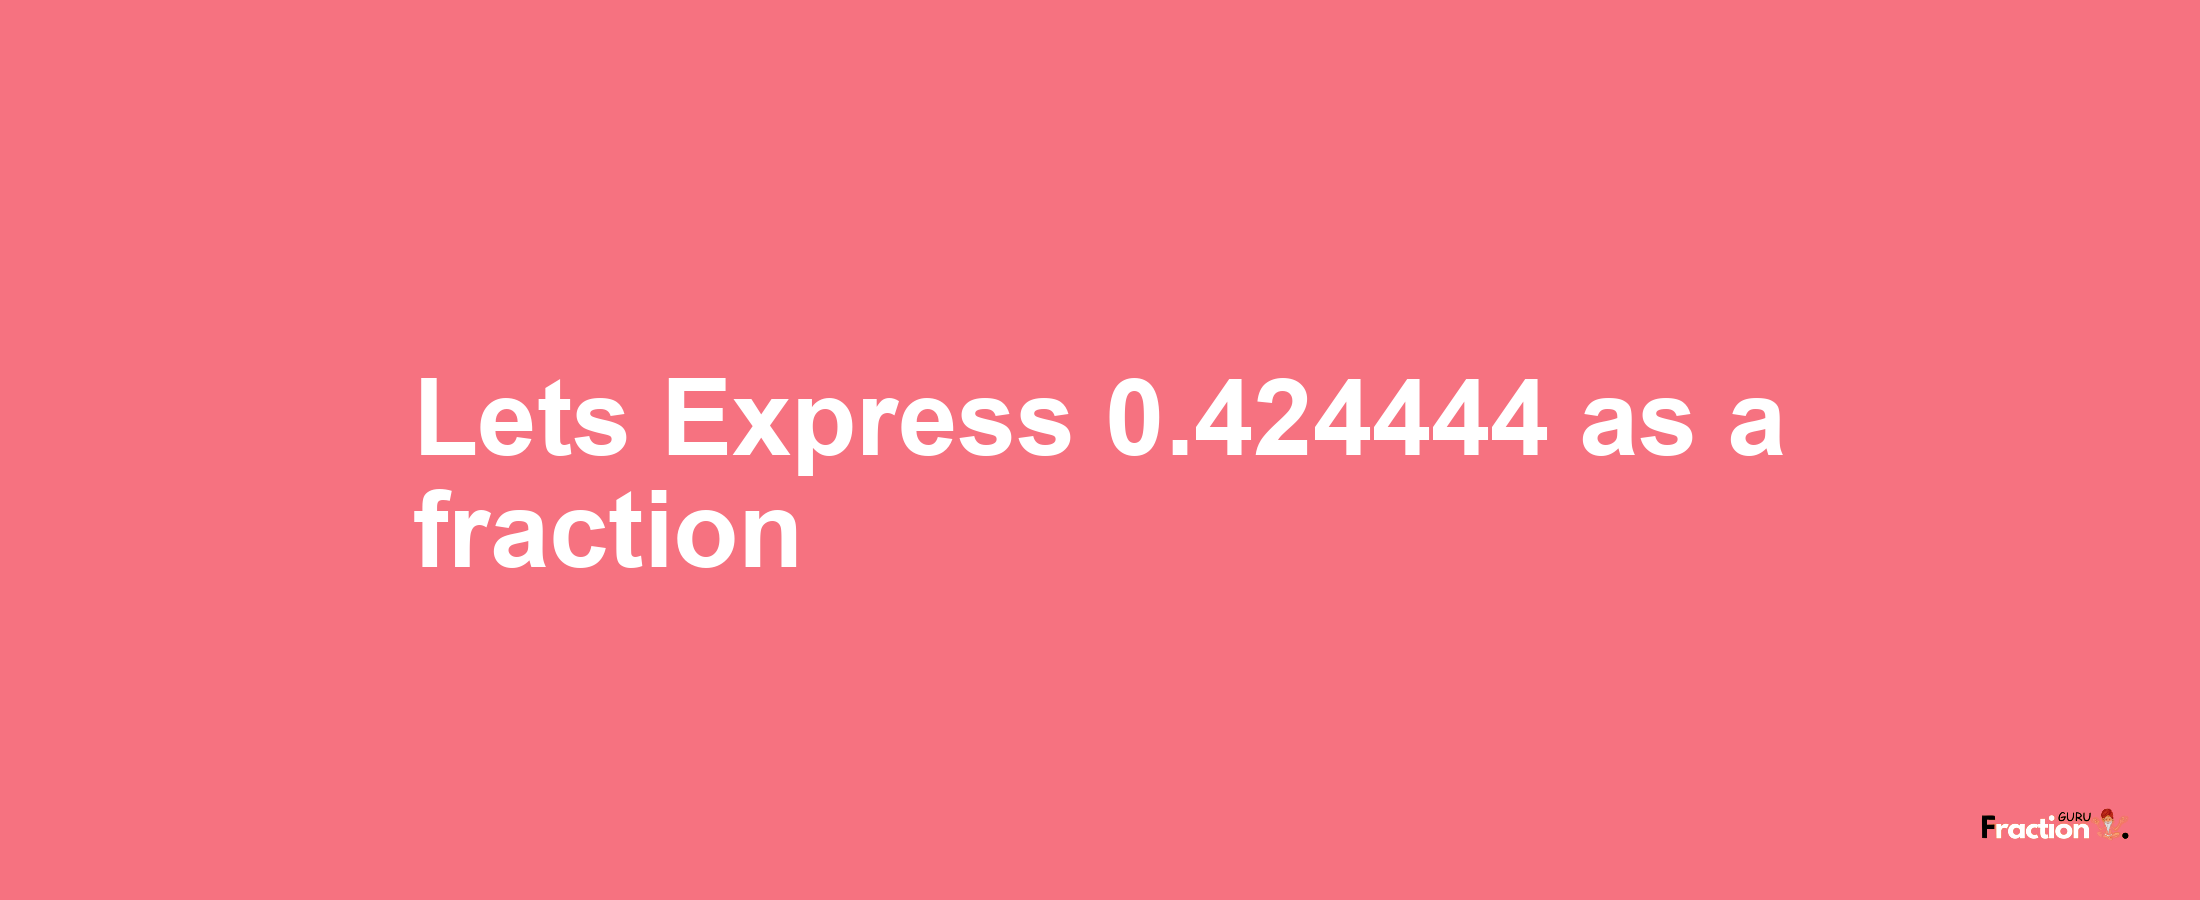 Lets Express 0.424444 as afraction